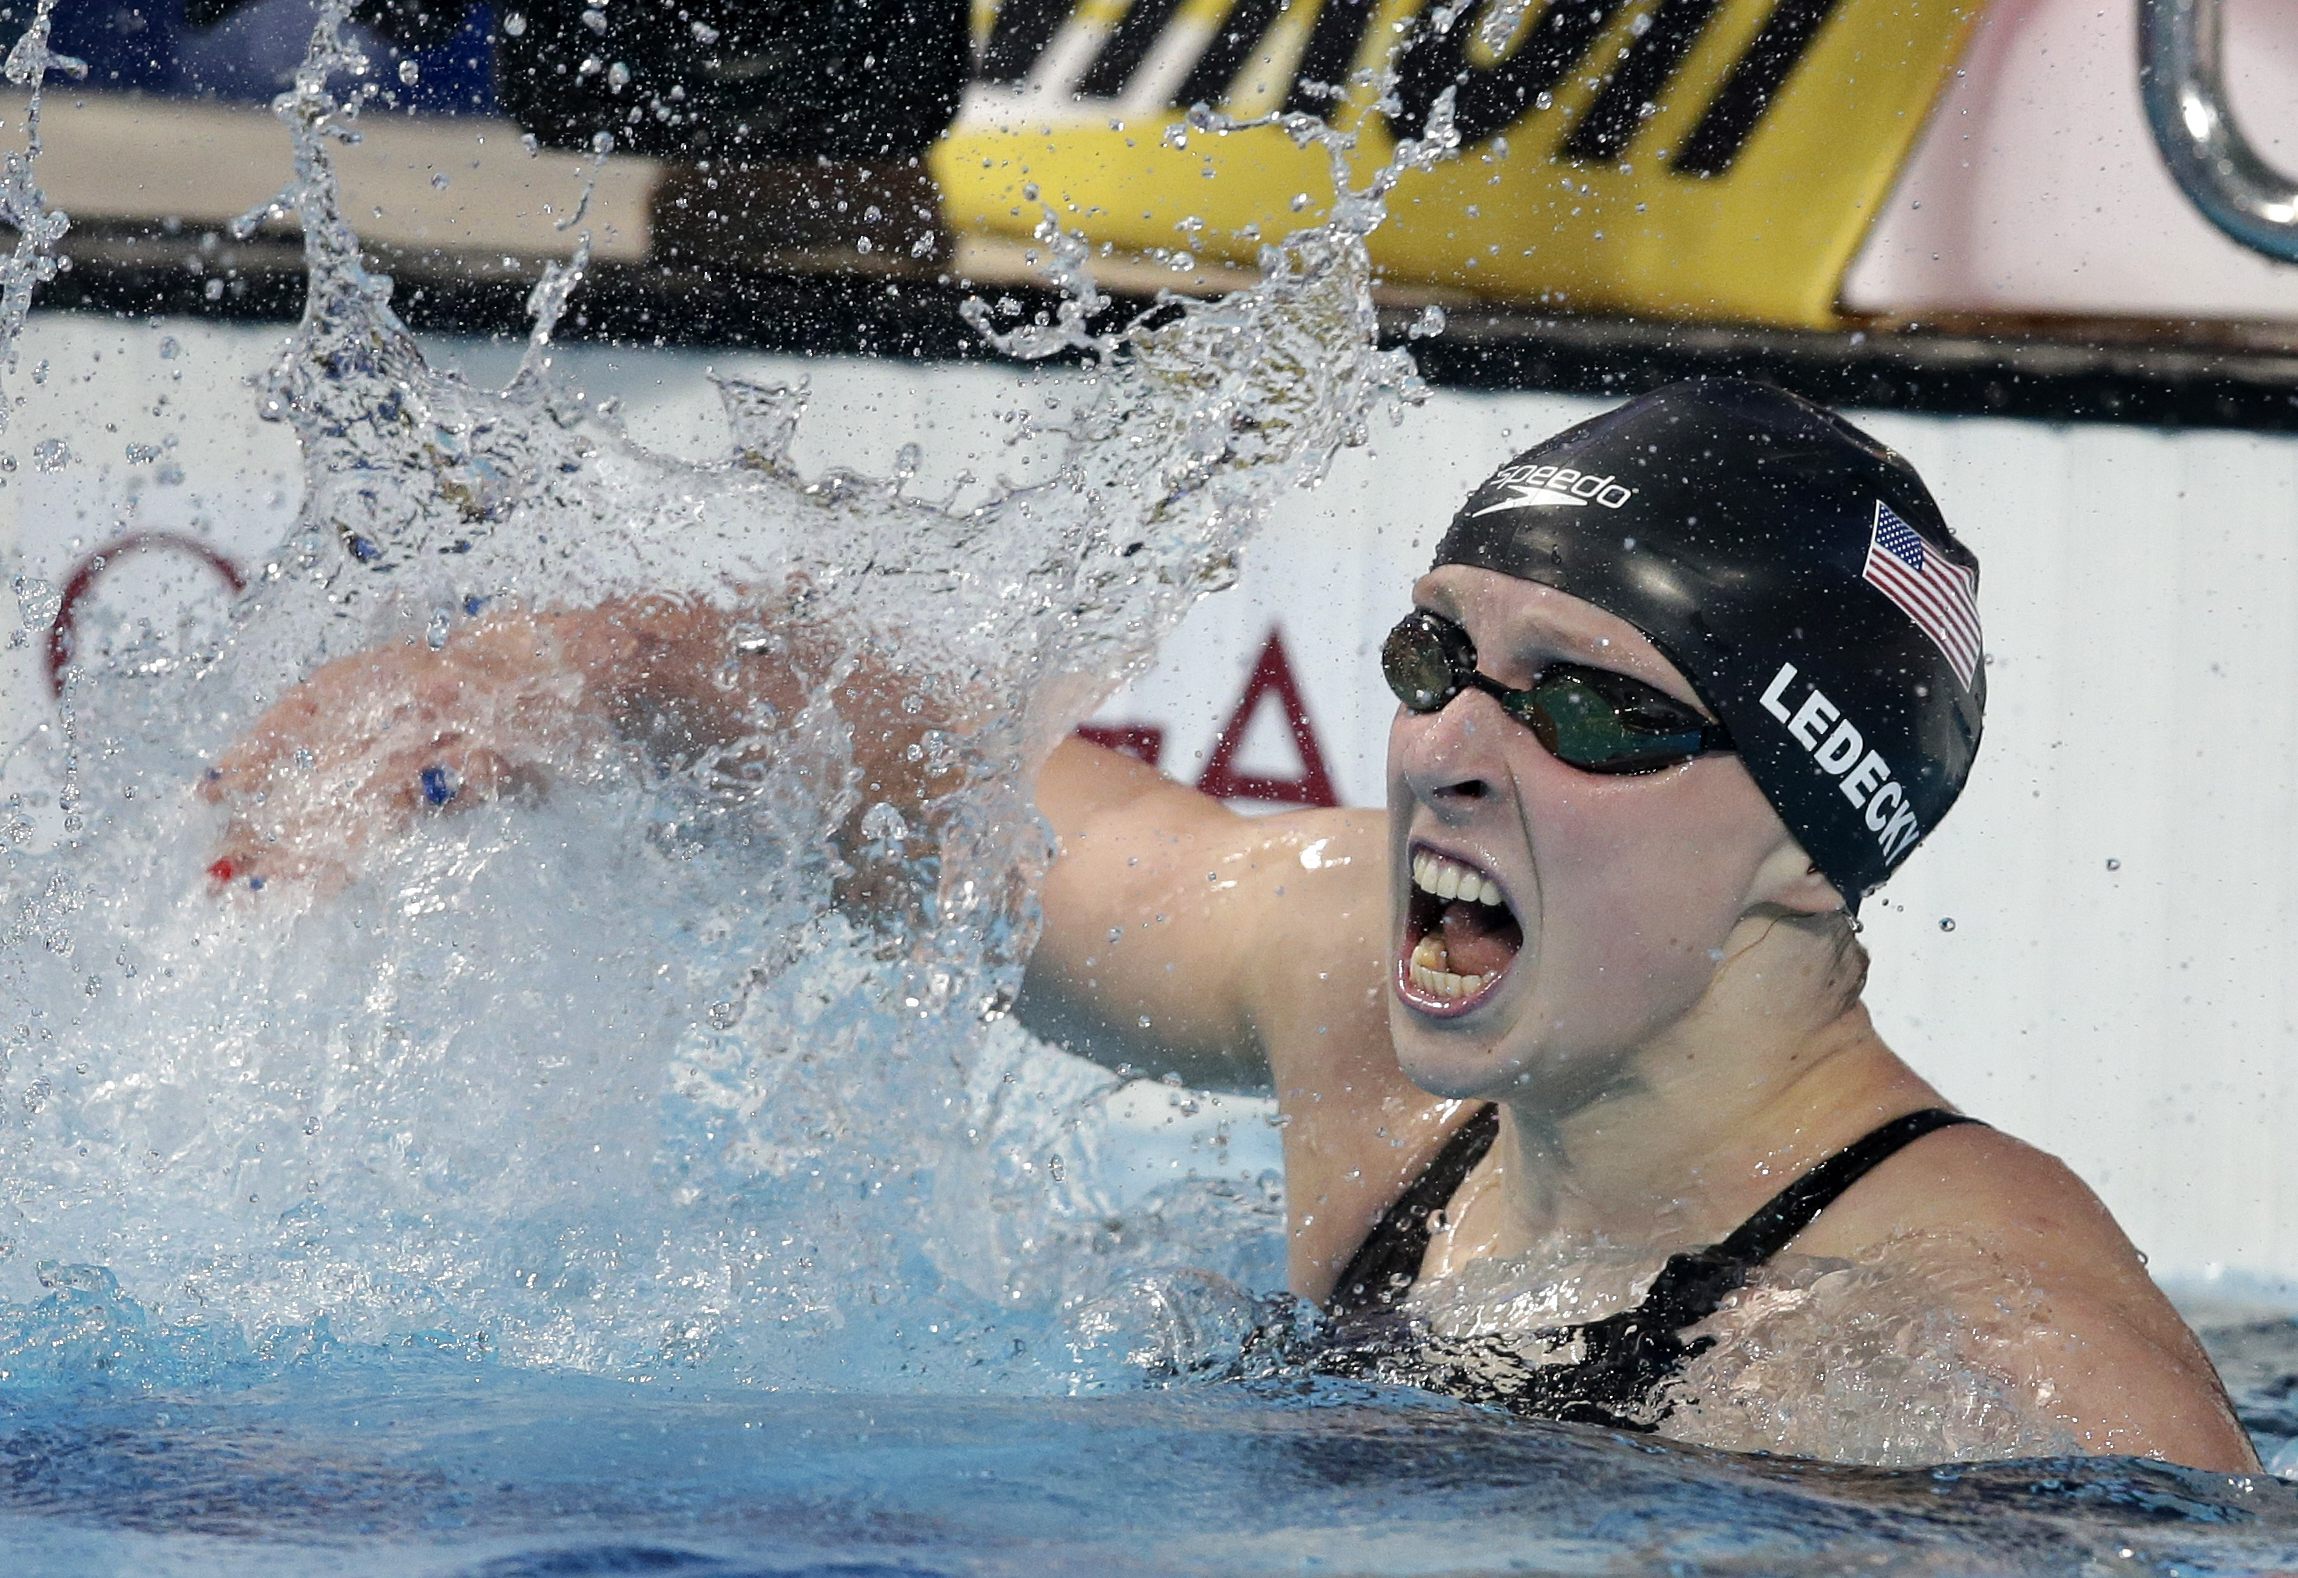 Katie Ledecky Shatters World Record, Earns 5th Gold at World Championships